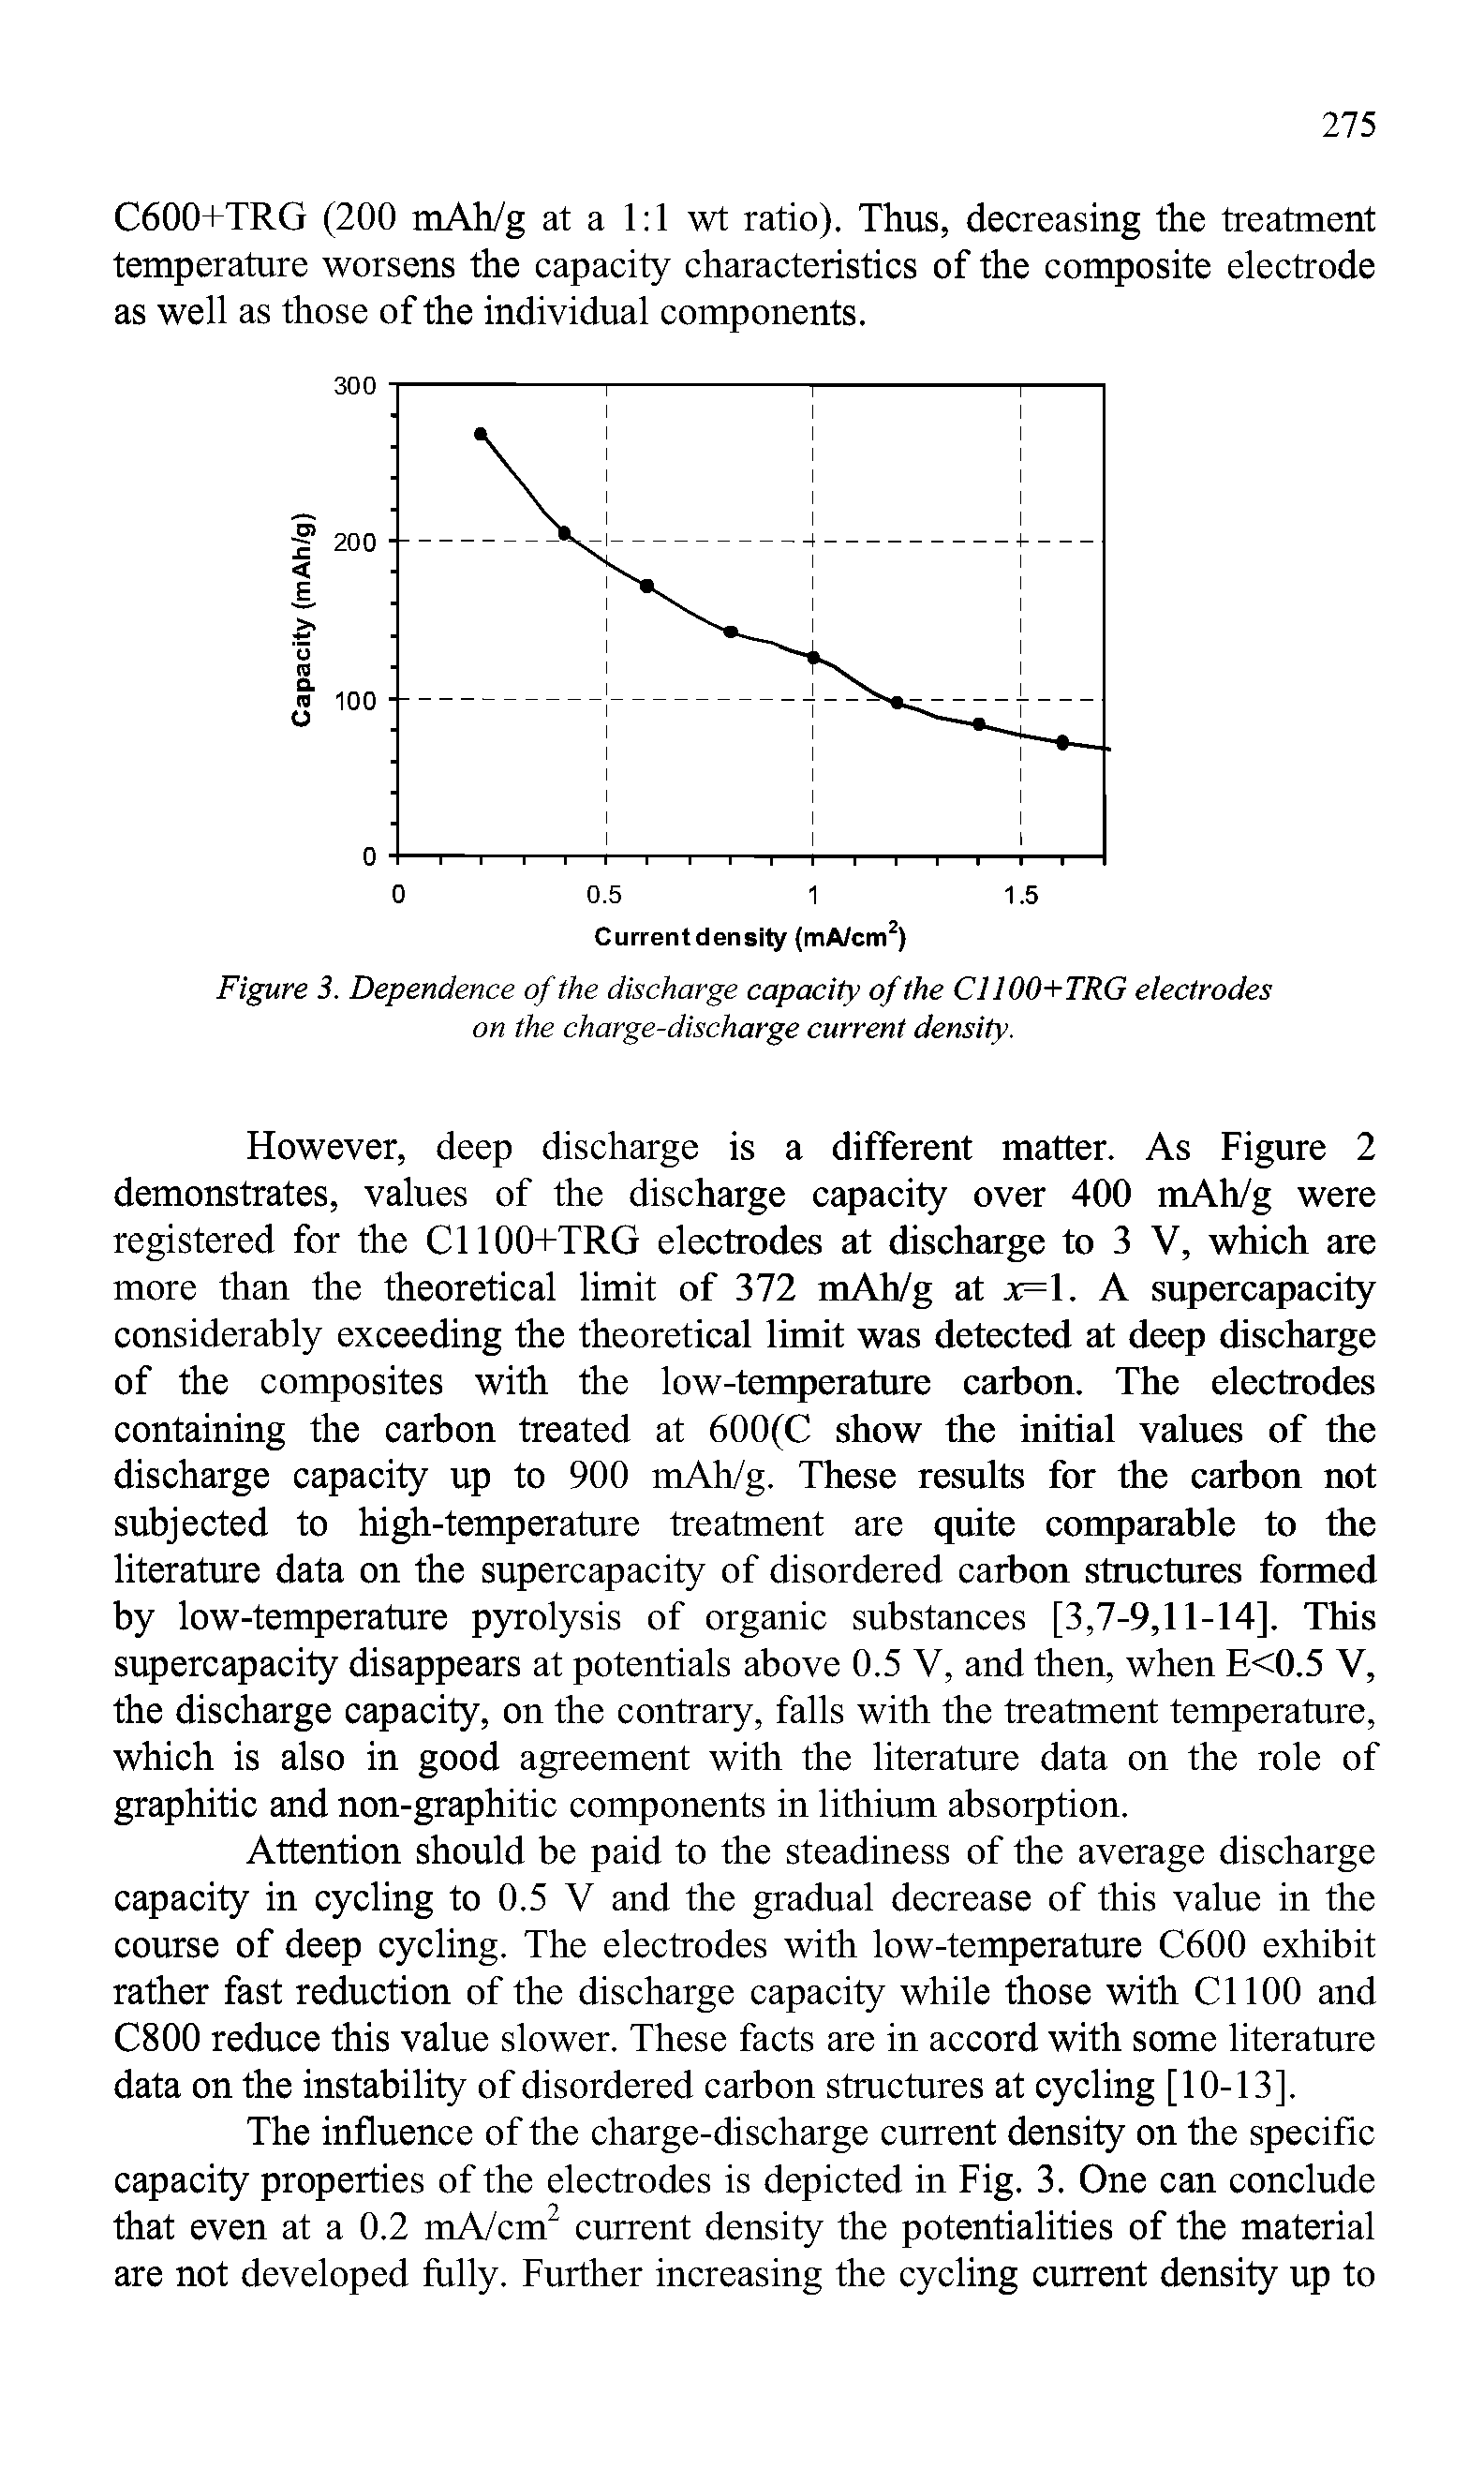 Figure 3. Dependence of the discharge capacity of the C1100+TRG electrodes on the charge-discharge current density.